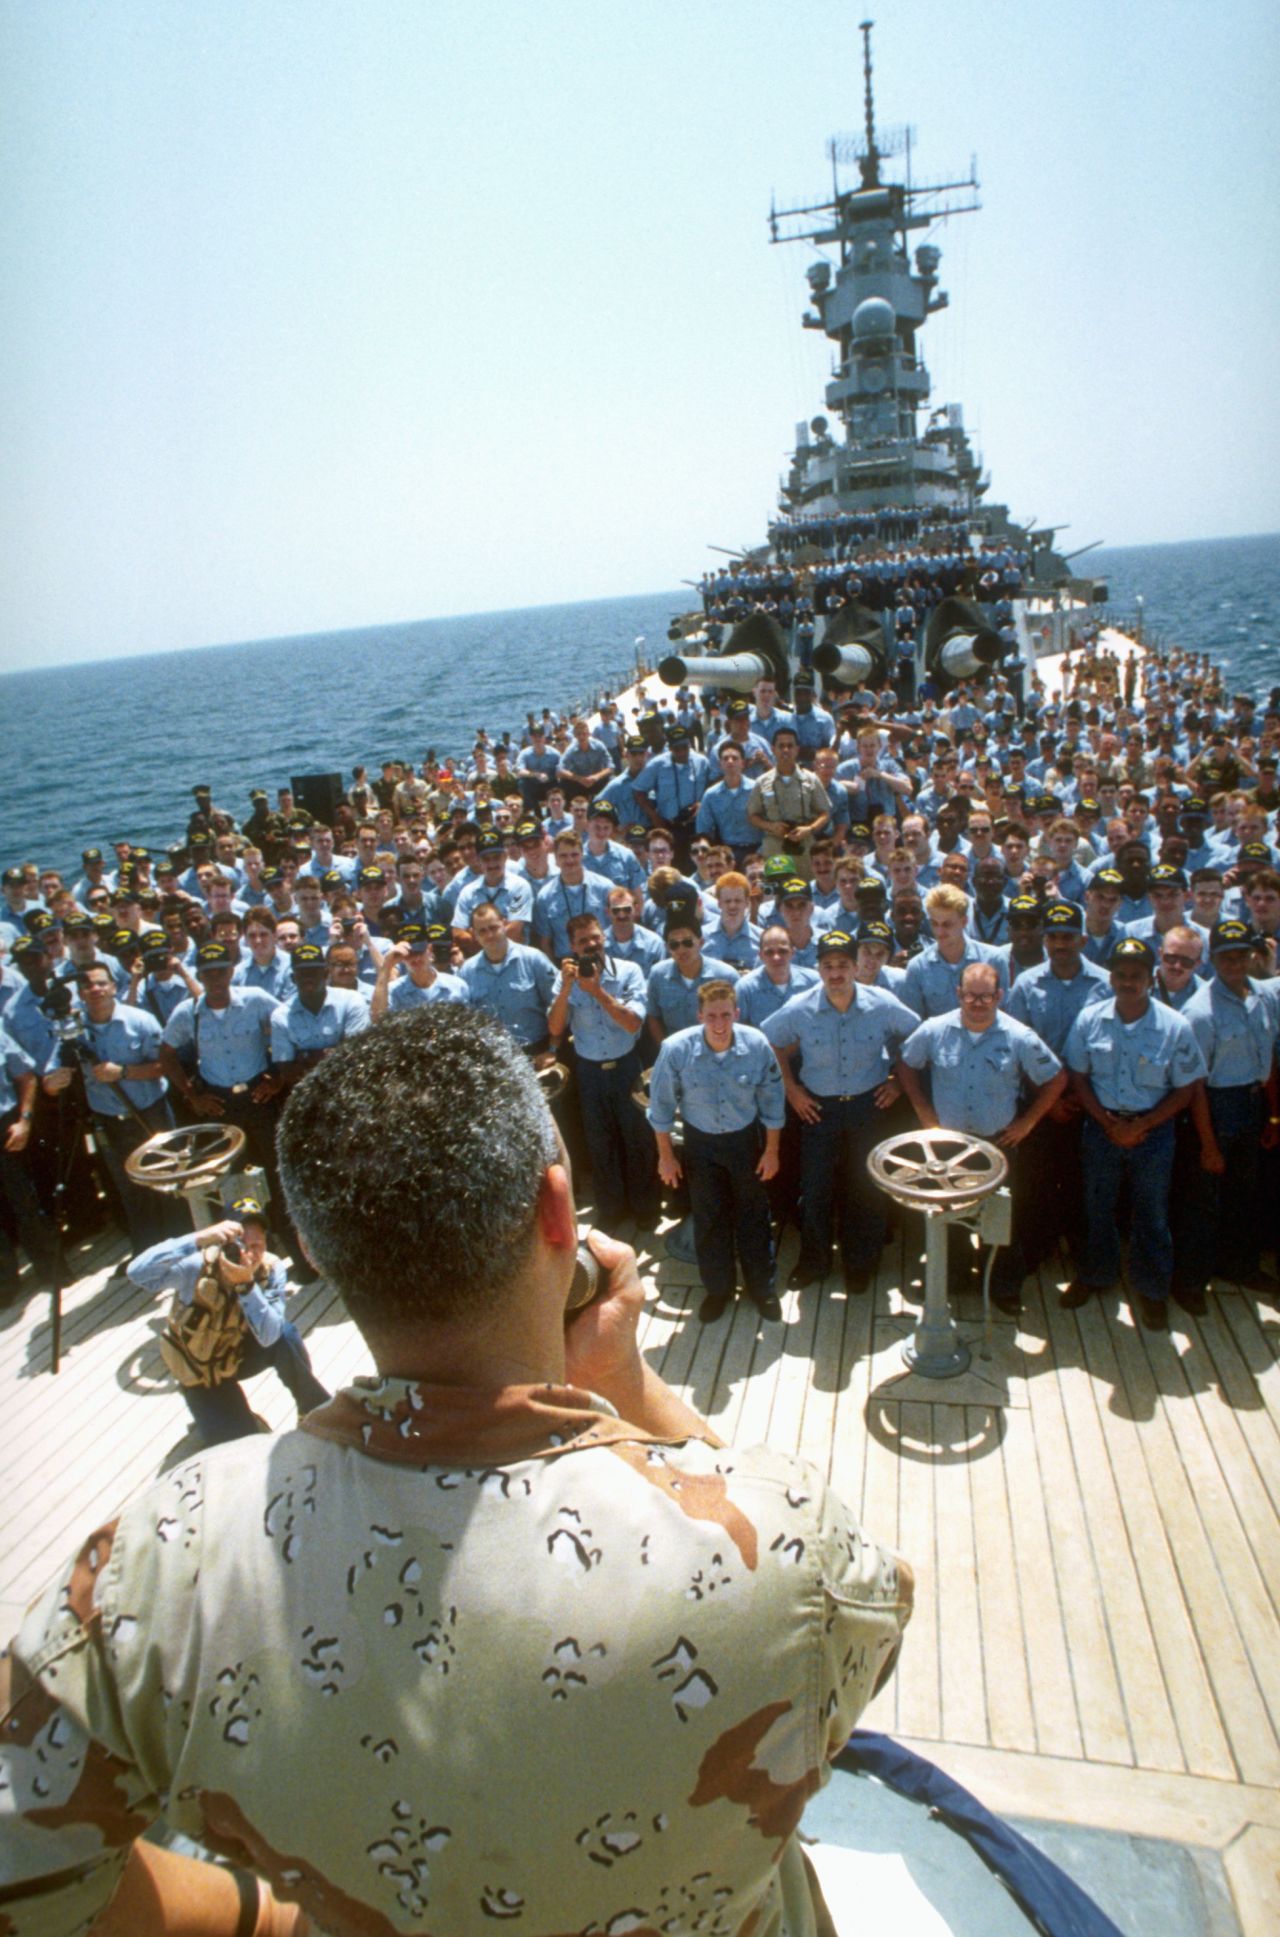 Powell addresses the crew of the USS Wisconsin during Operation Desert Shield in 1990.